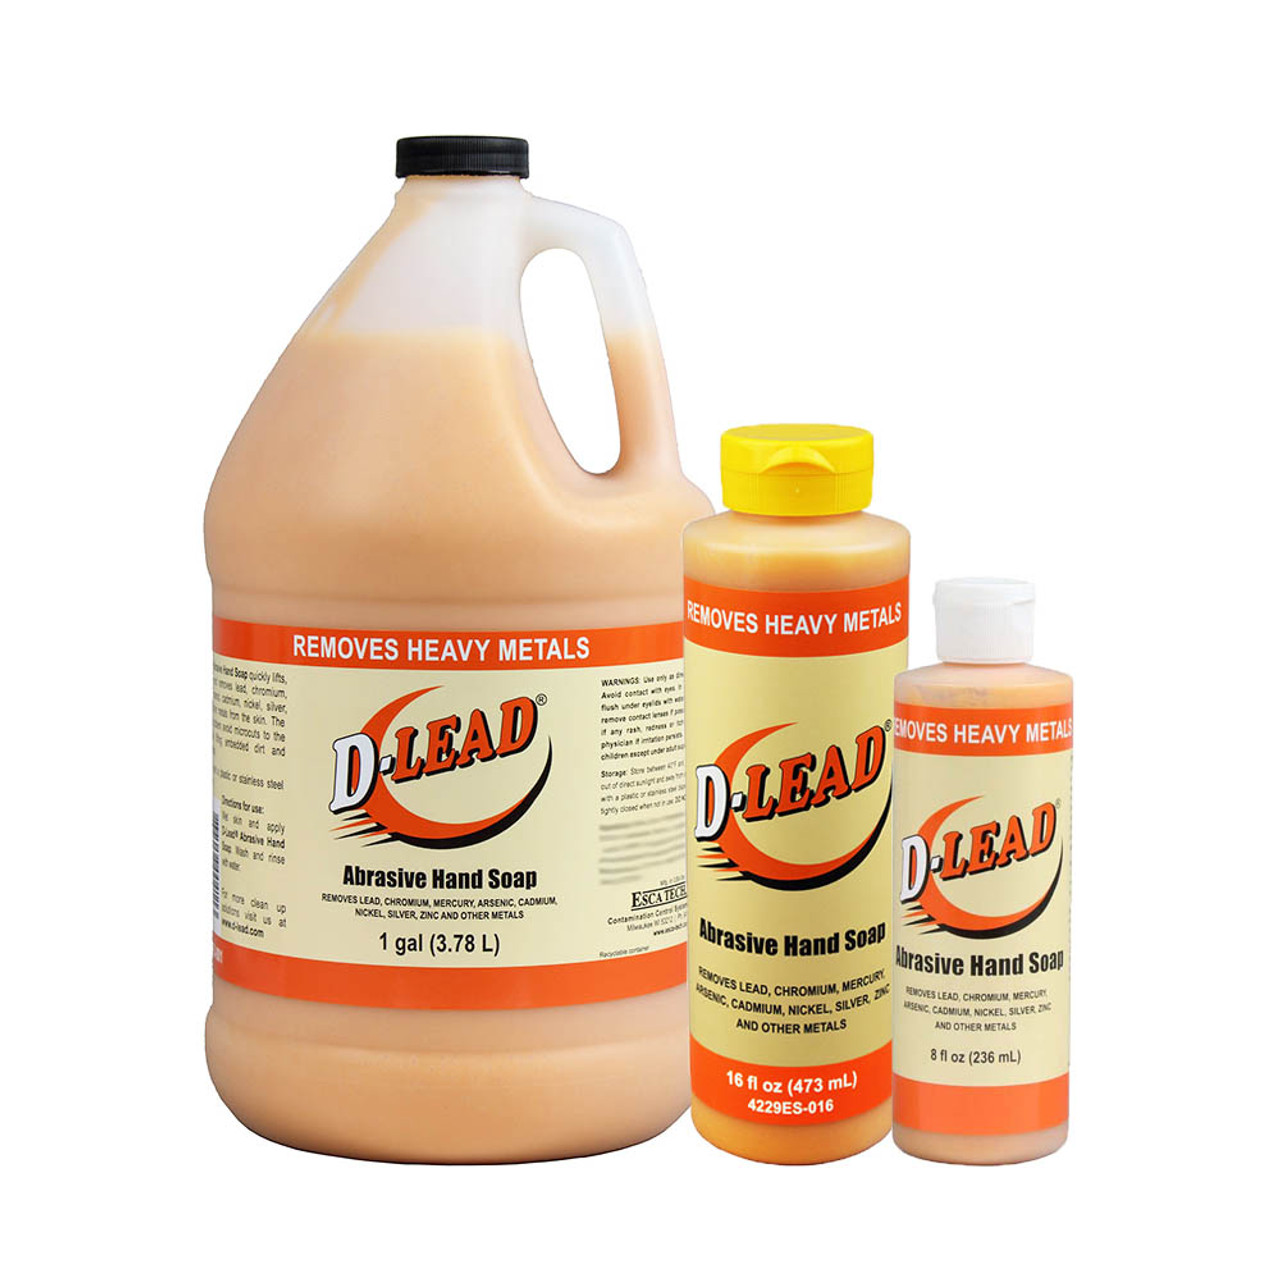 D-lead Dye & Fragrance-Free Hand and Body Soap - 1 Gallon